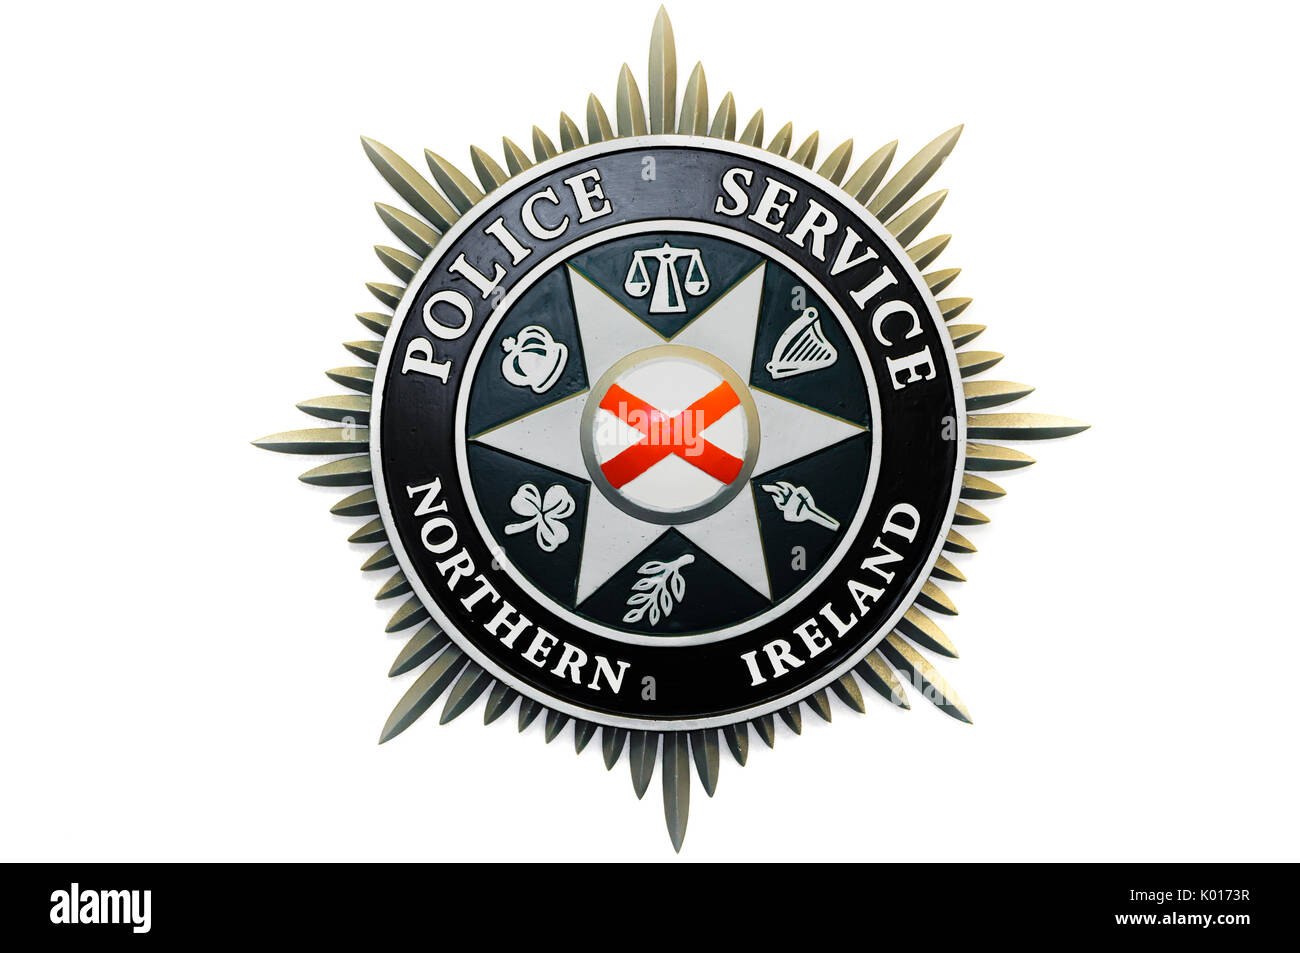 Police Service of Northern Ireland logo on a wall in their Headquarters, Belfast Stock Photo